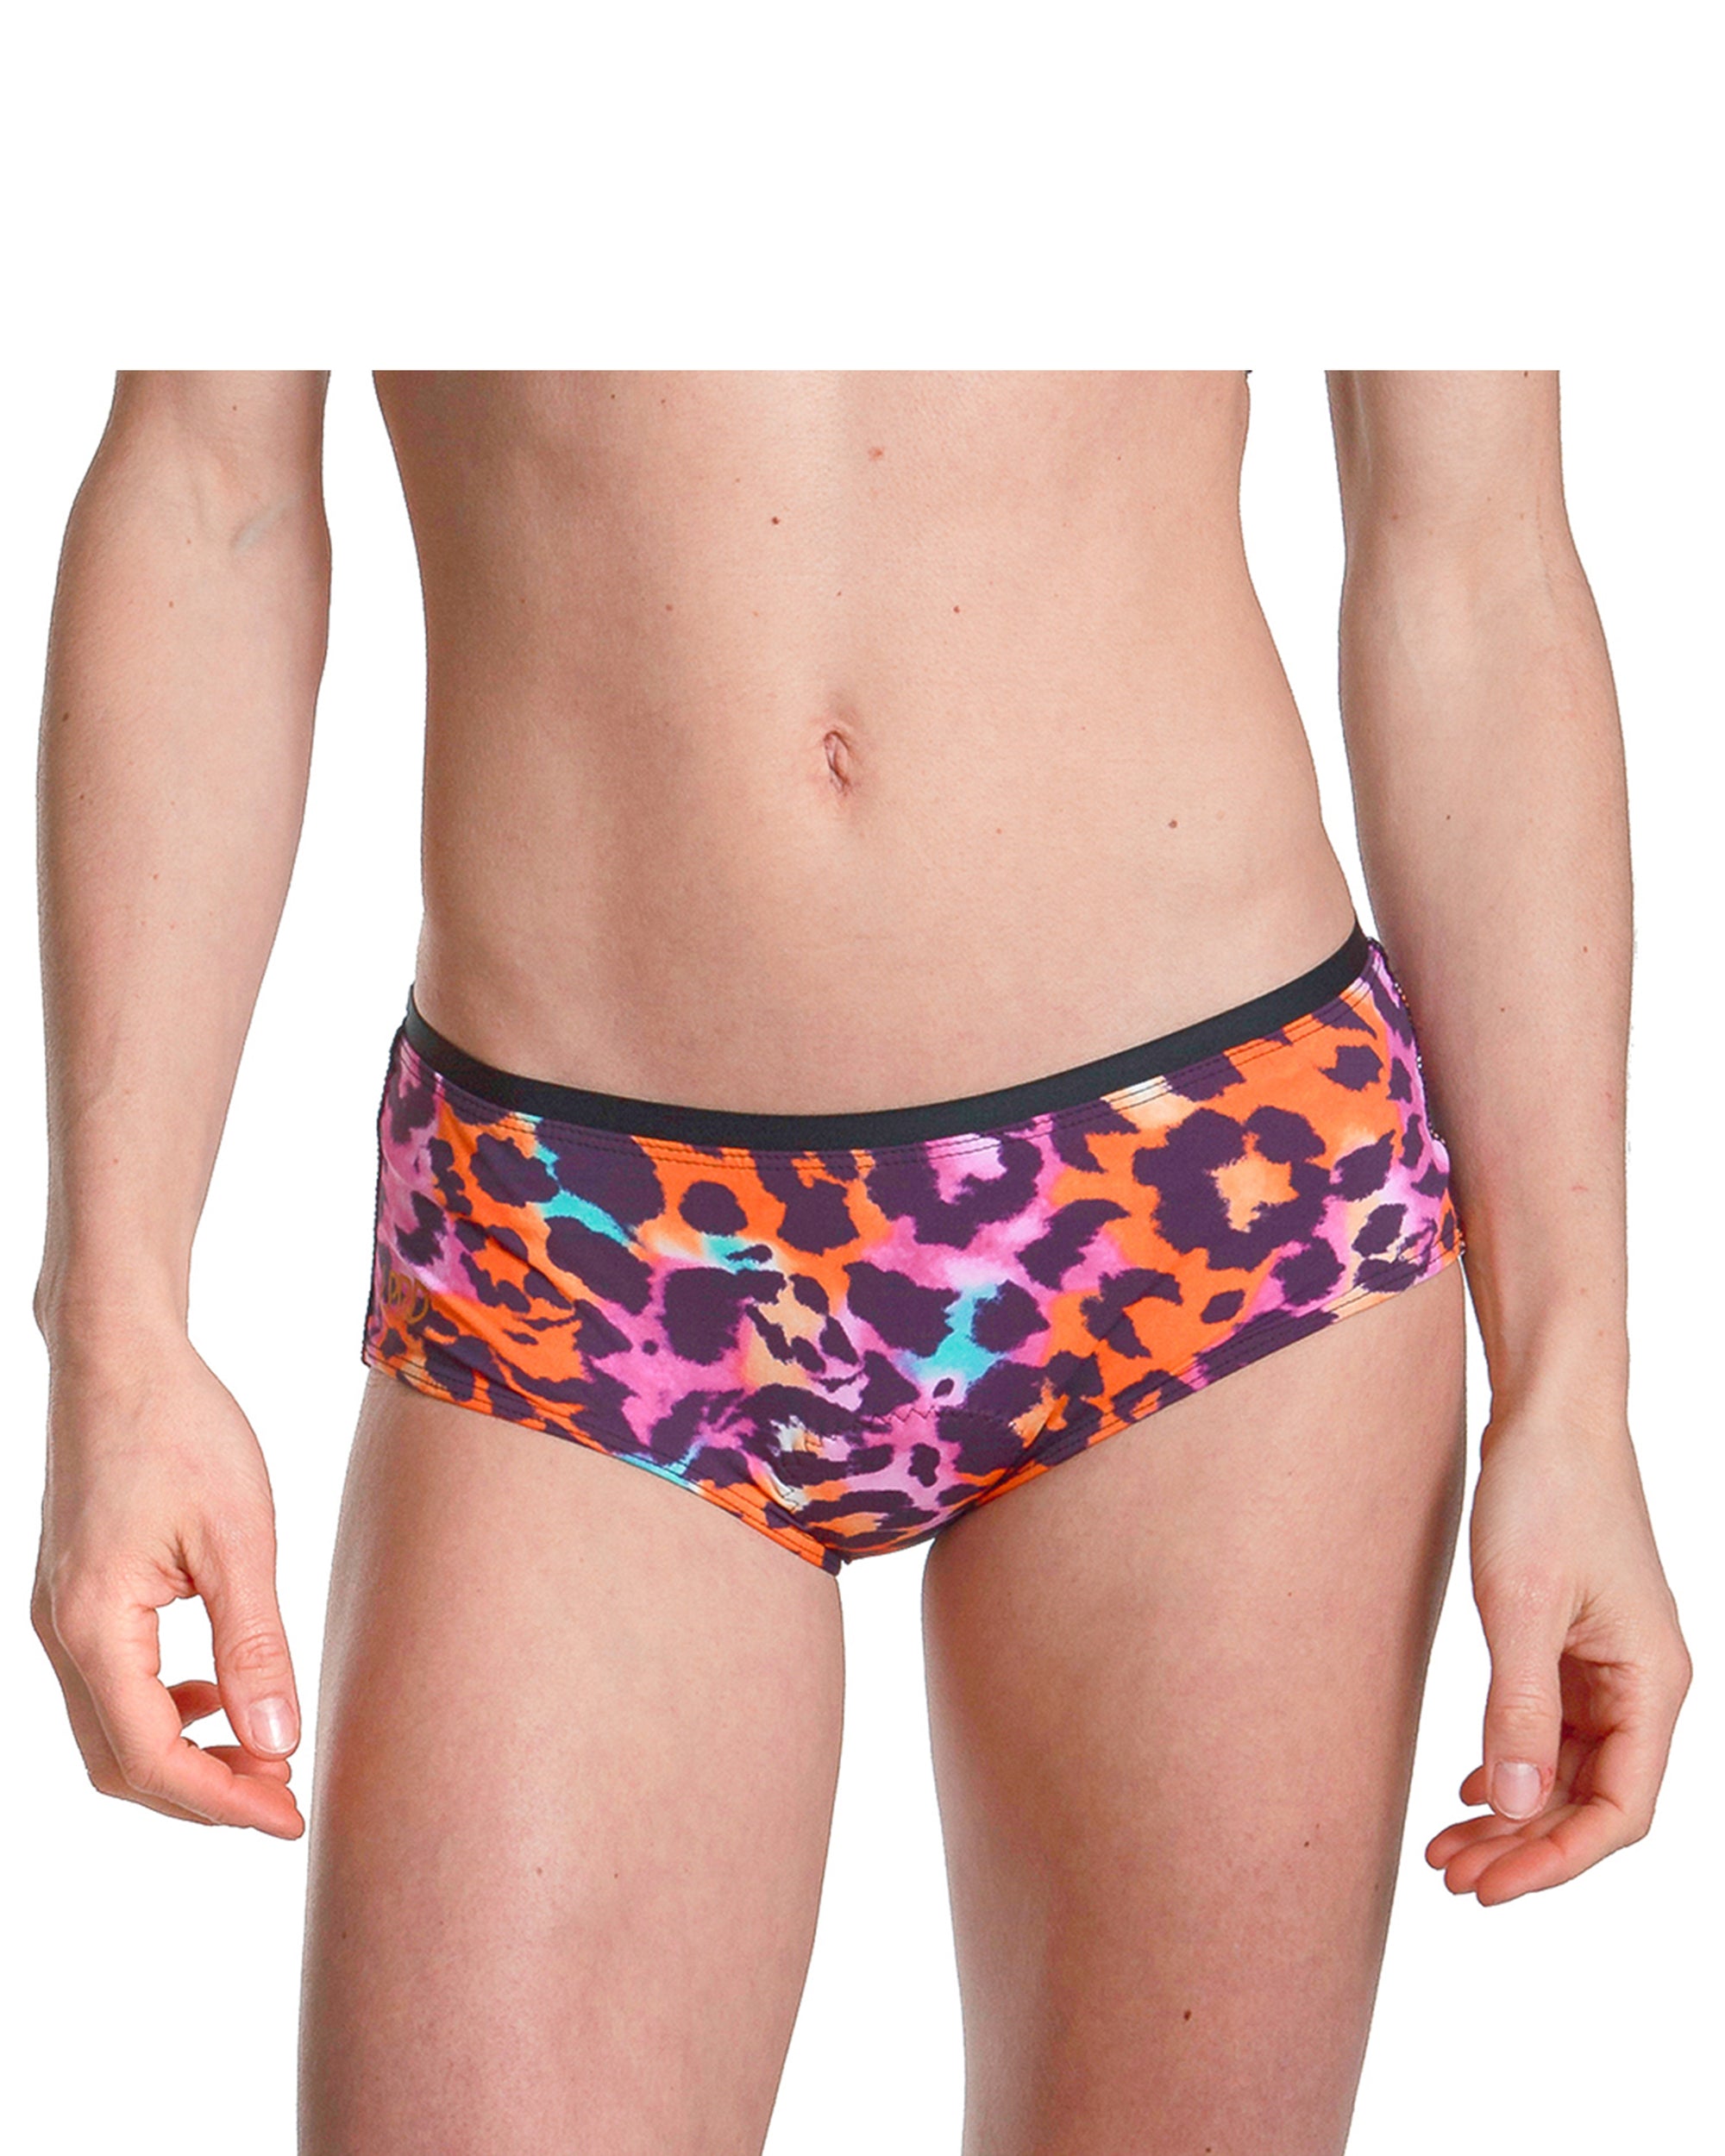 Ladies padded cycling underwear - Pink leopard print - Colourful